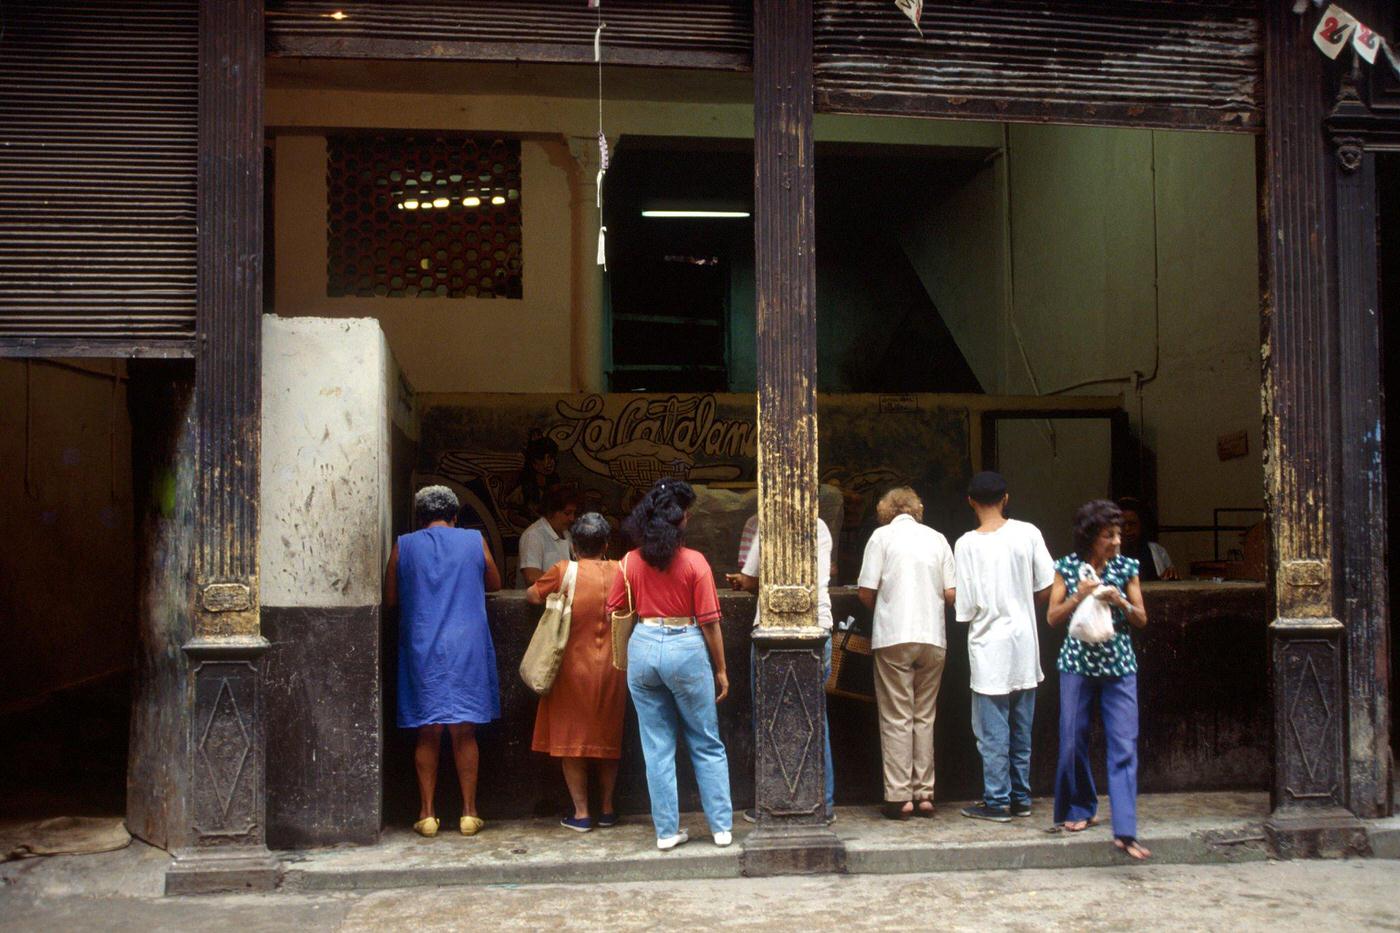 Cuban men and women queuing in front of a public shop using the ration book in Cuba, 1990.